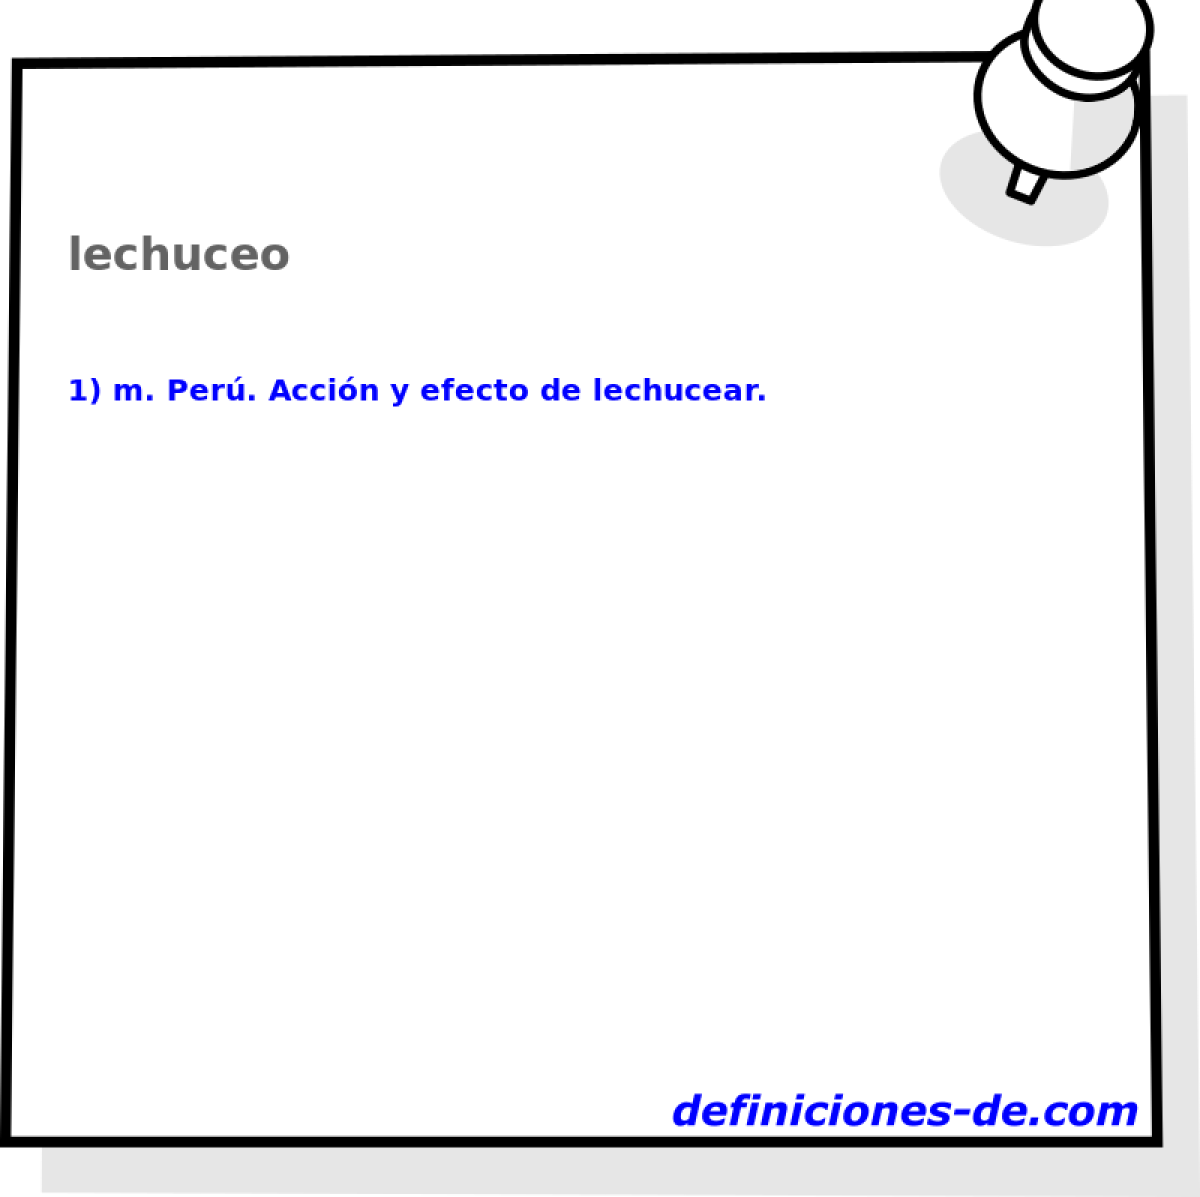 lechuceo 